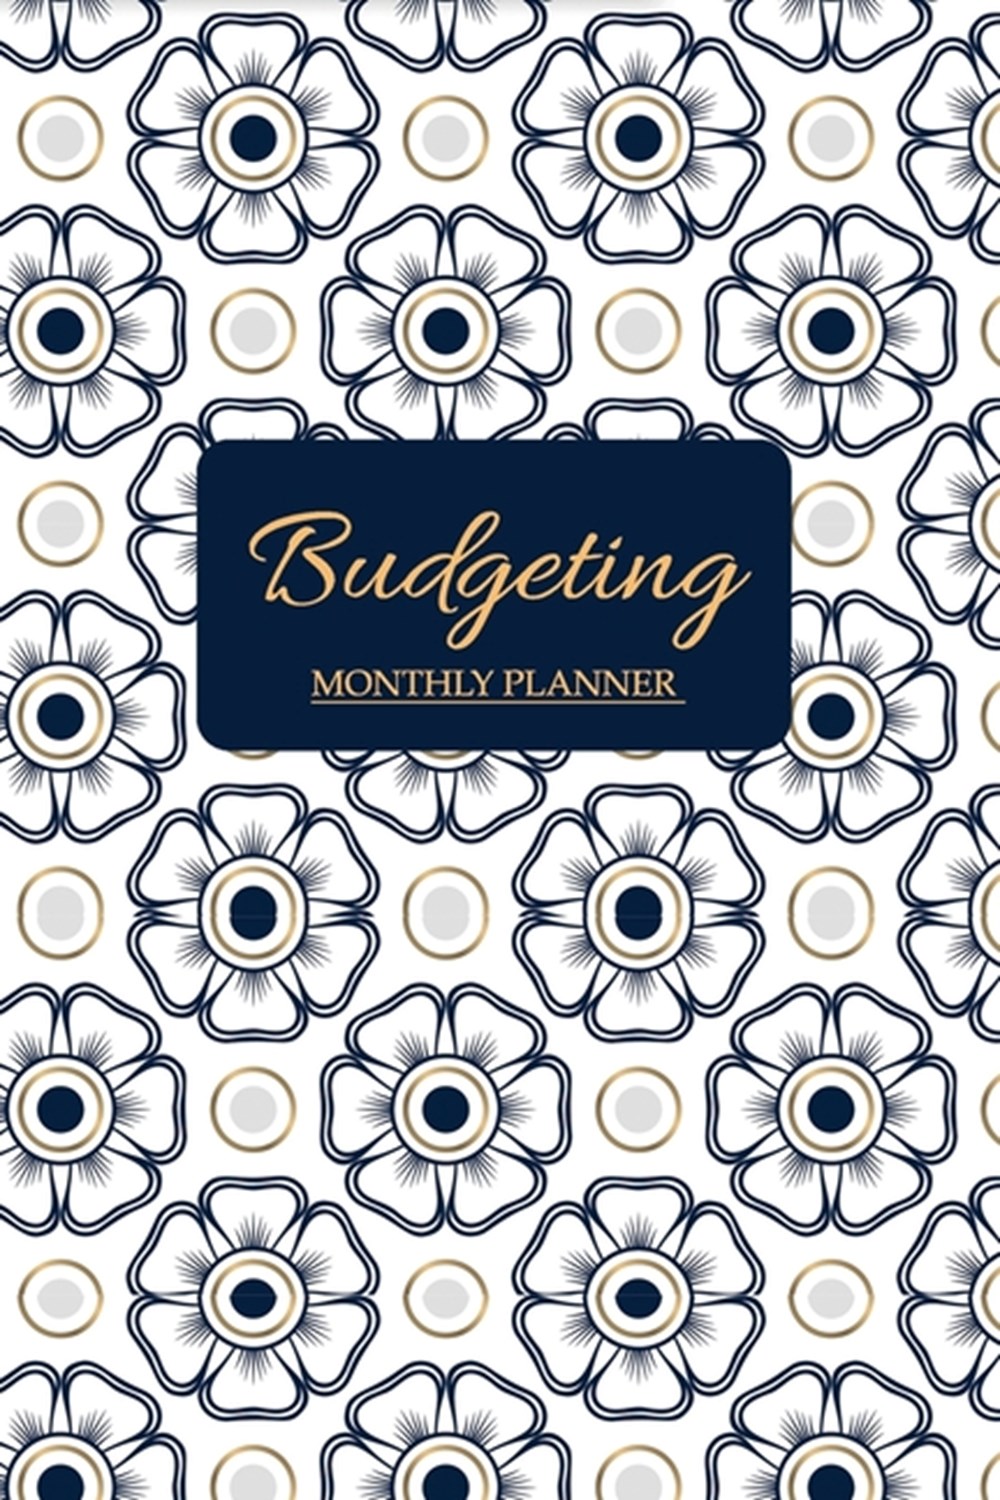 Budgeting Monthly Planner Monthly Budget Planner and Expense Tracker for a DEBT FREE Life - Balanced